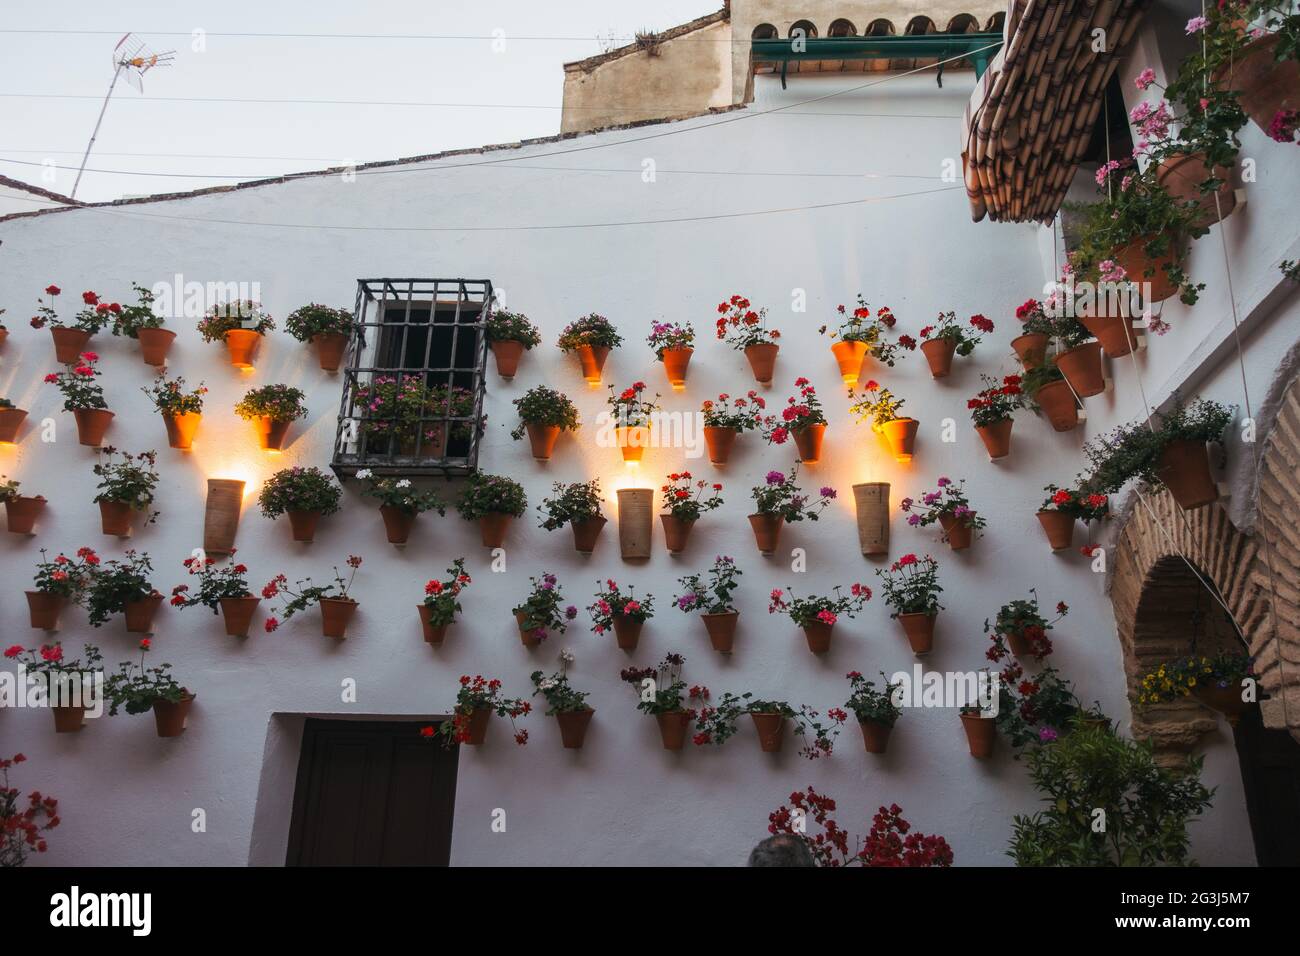 Pot plants cover courtyards (patios) of residents' homes in Córdoba, Spain, which open up to the public once per year as part of the Patio Festival Stock Photo